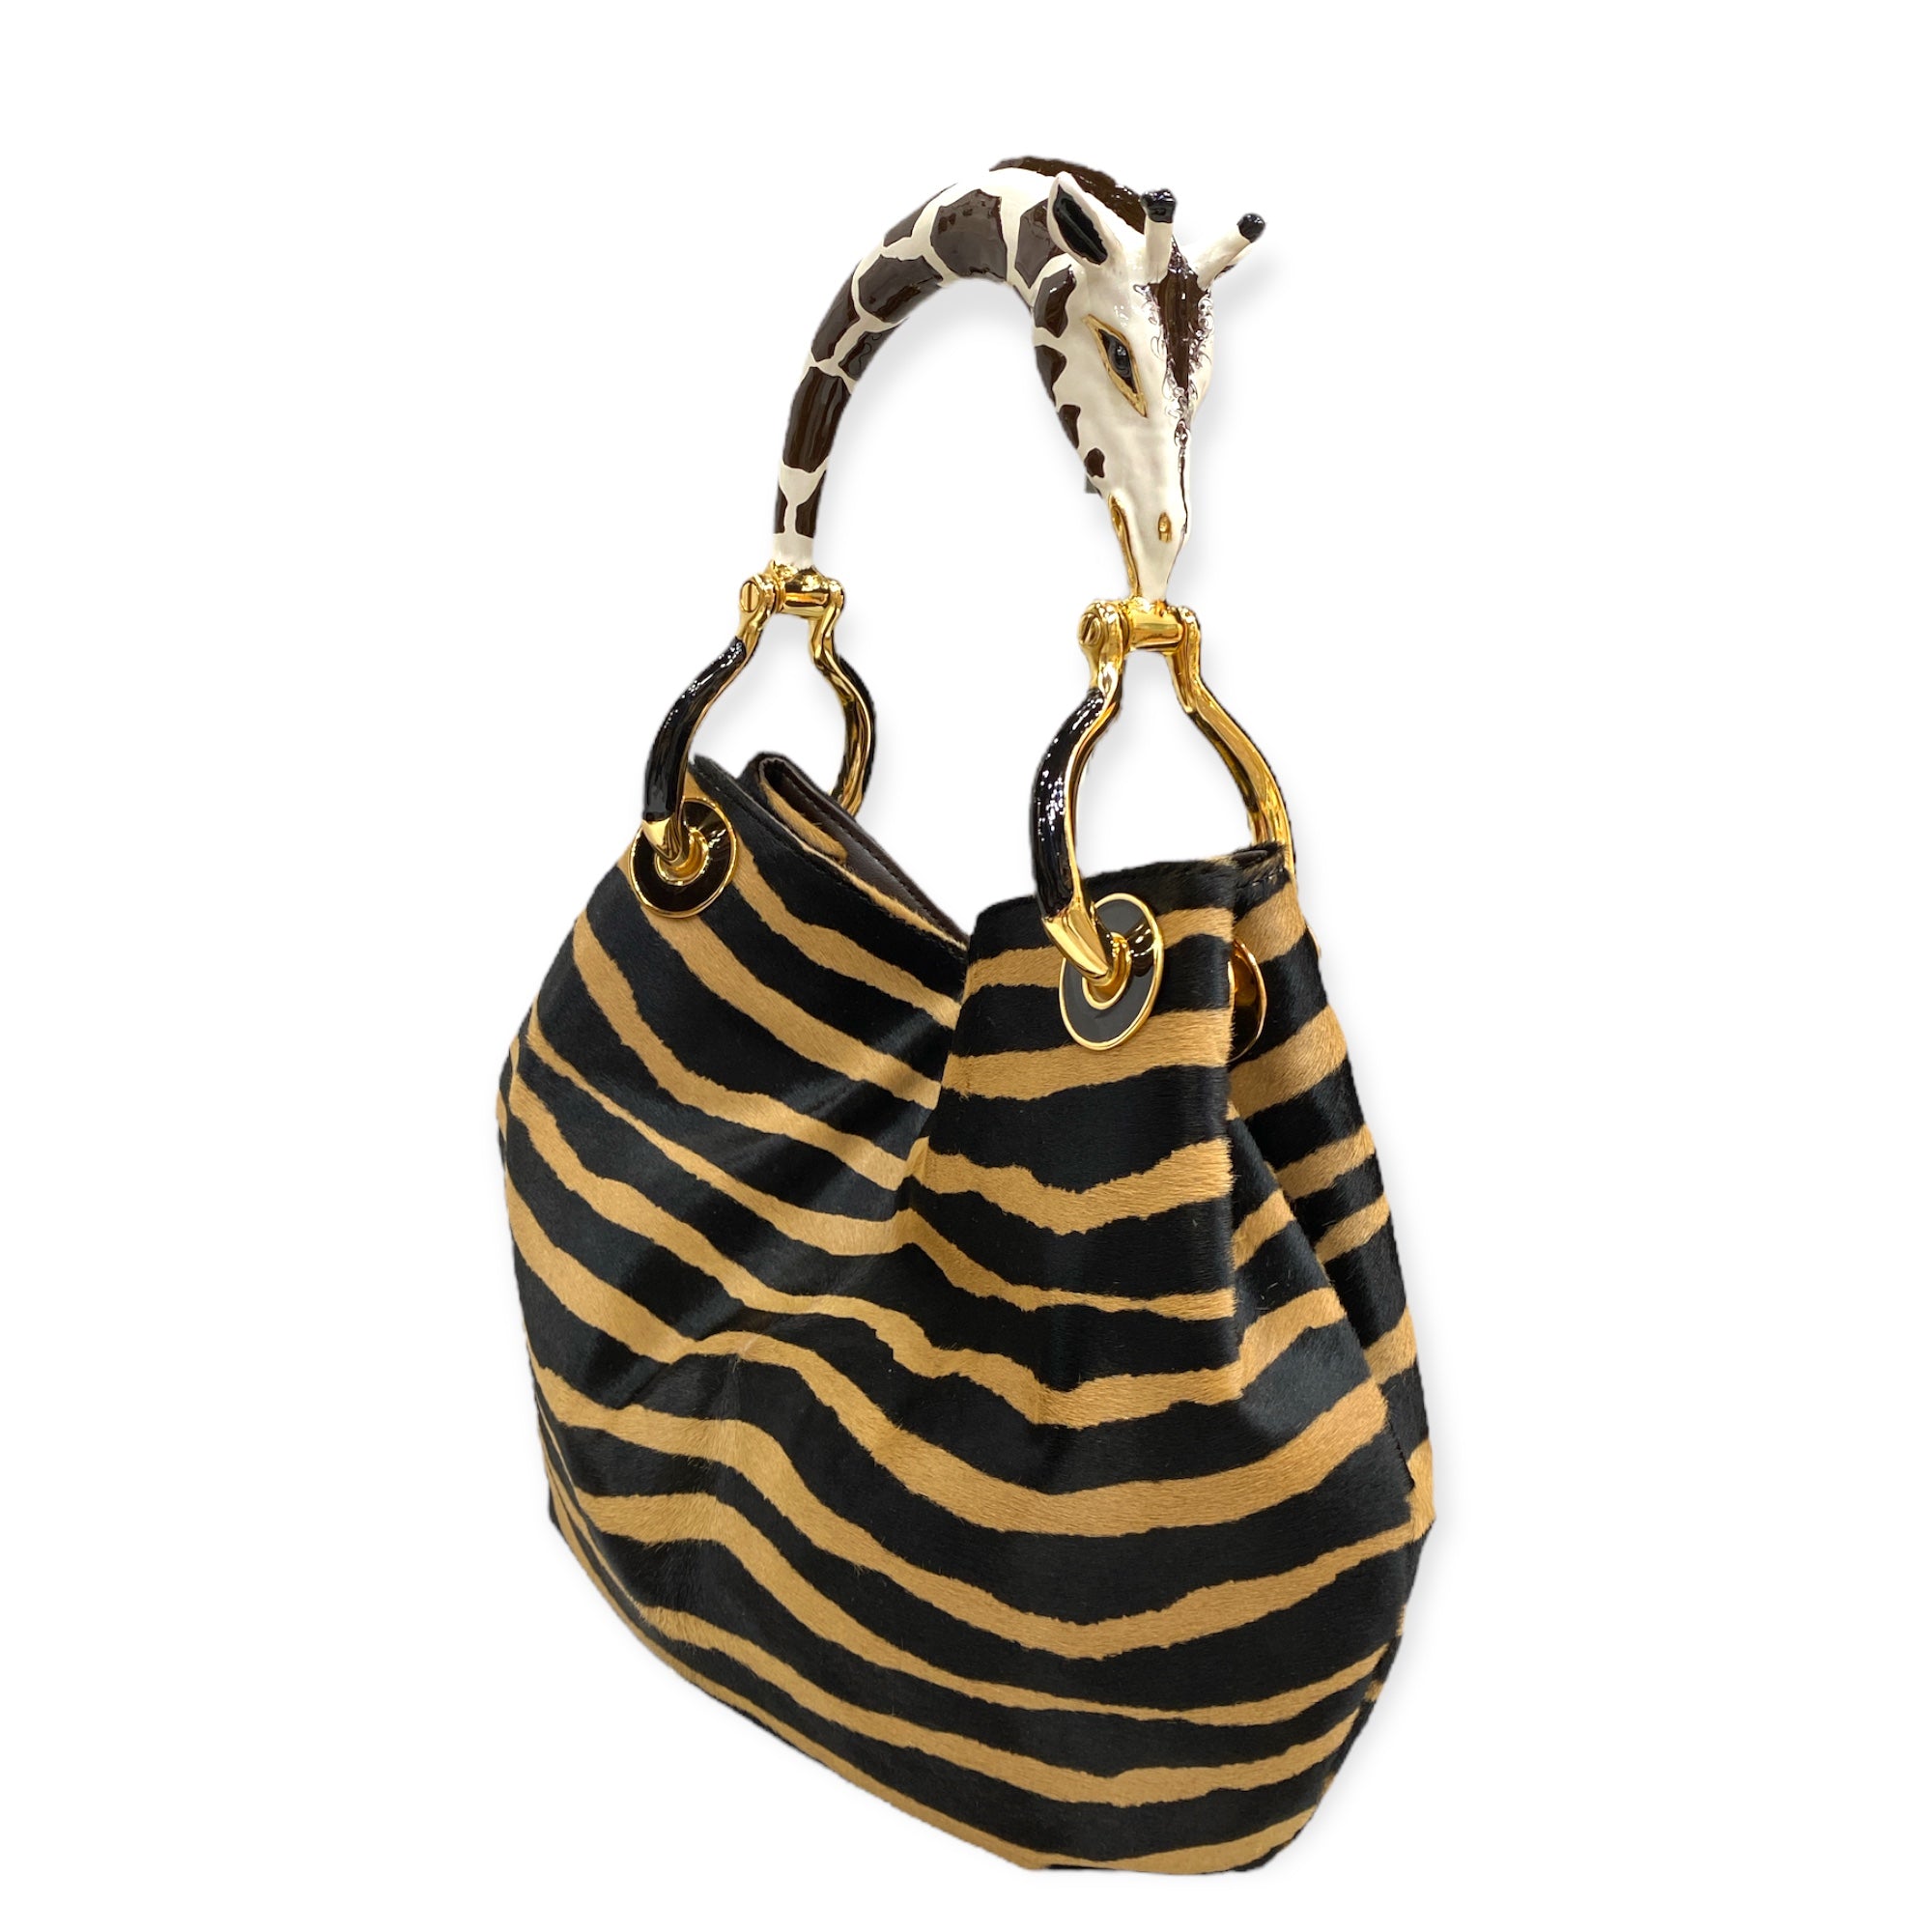 GIRAFFE SMALL BAG WITH PONY-HAIR PRINT   LUXURY HANDBAGS COLLECTION Creart2 Made in Italy Precious handbag made in Italy with fine accessories made in polychrome enamels and exclusive hides, every bag is the result of an accurate handcraft manufacture that makes it unique. The "sculpture" handle is made of metal with 24 Kt Gold Plated parts and the enamel is…